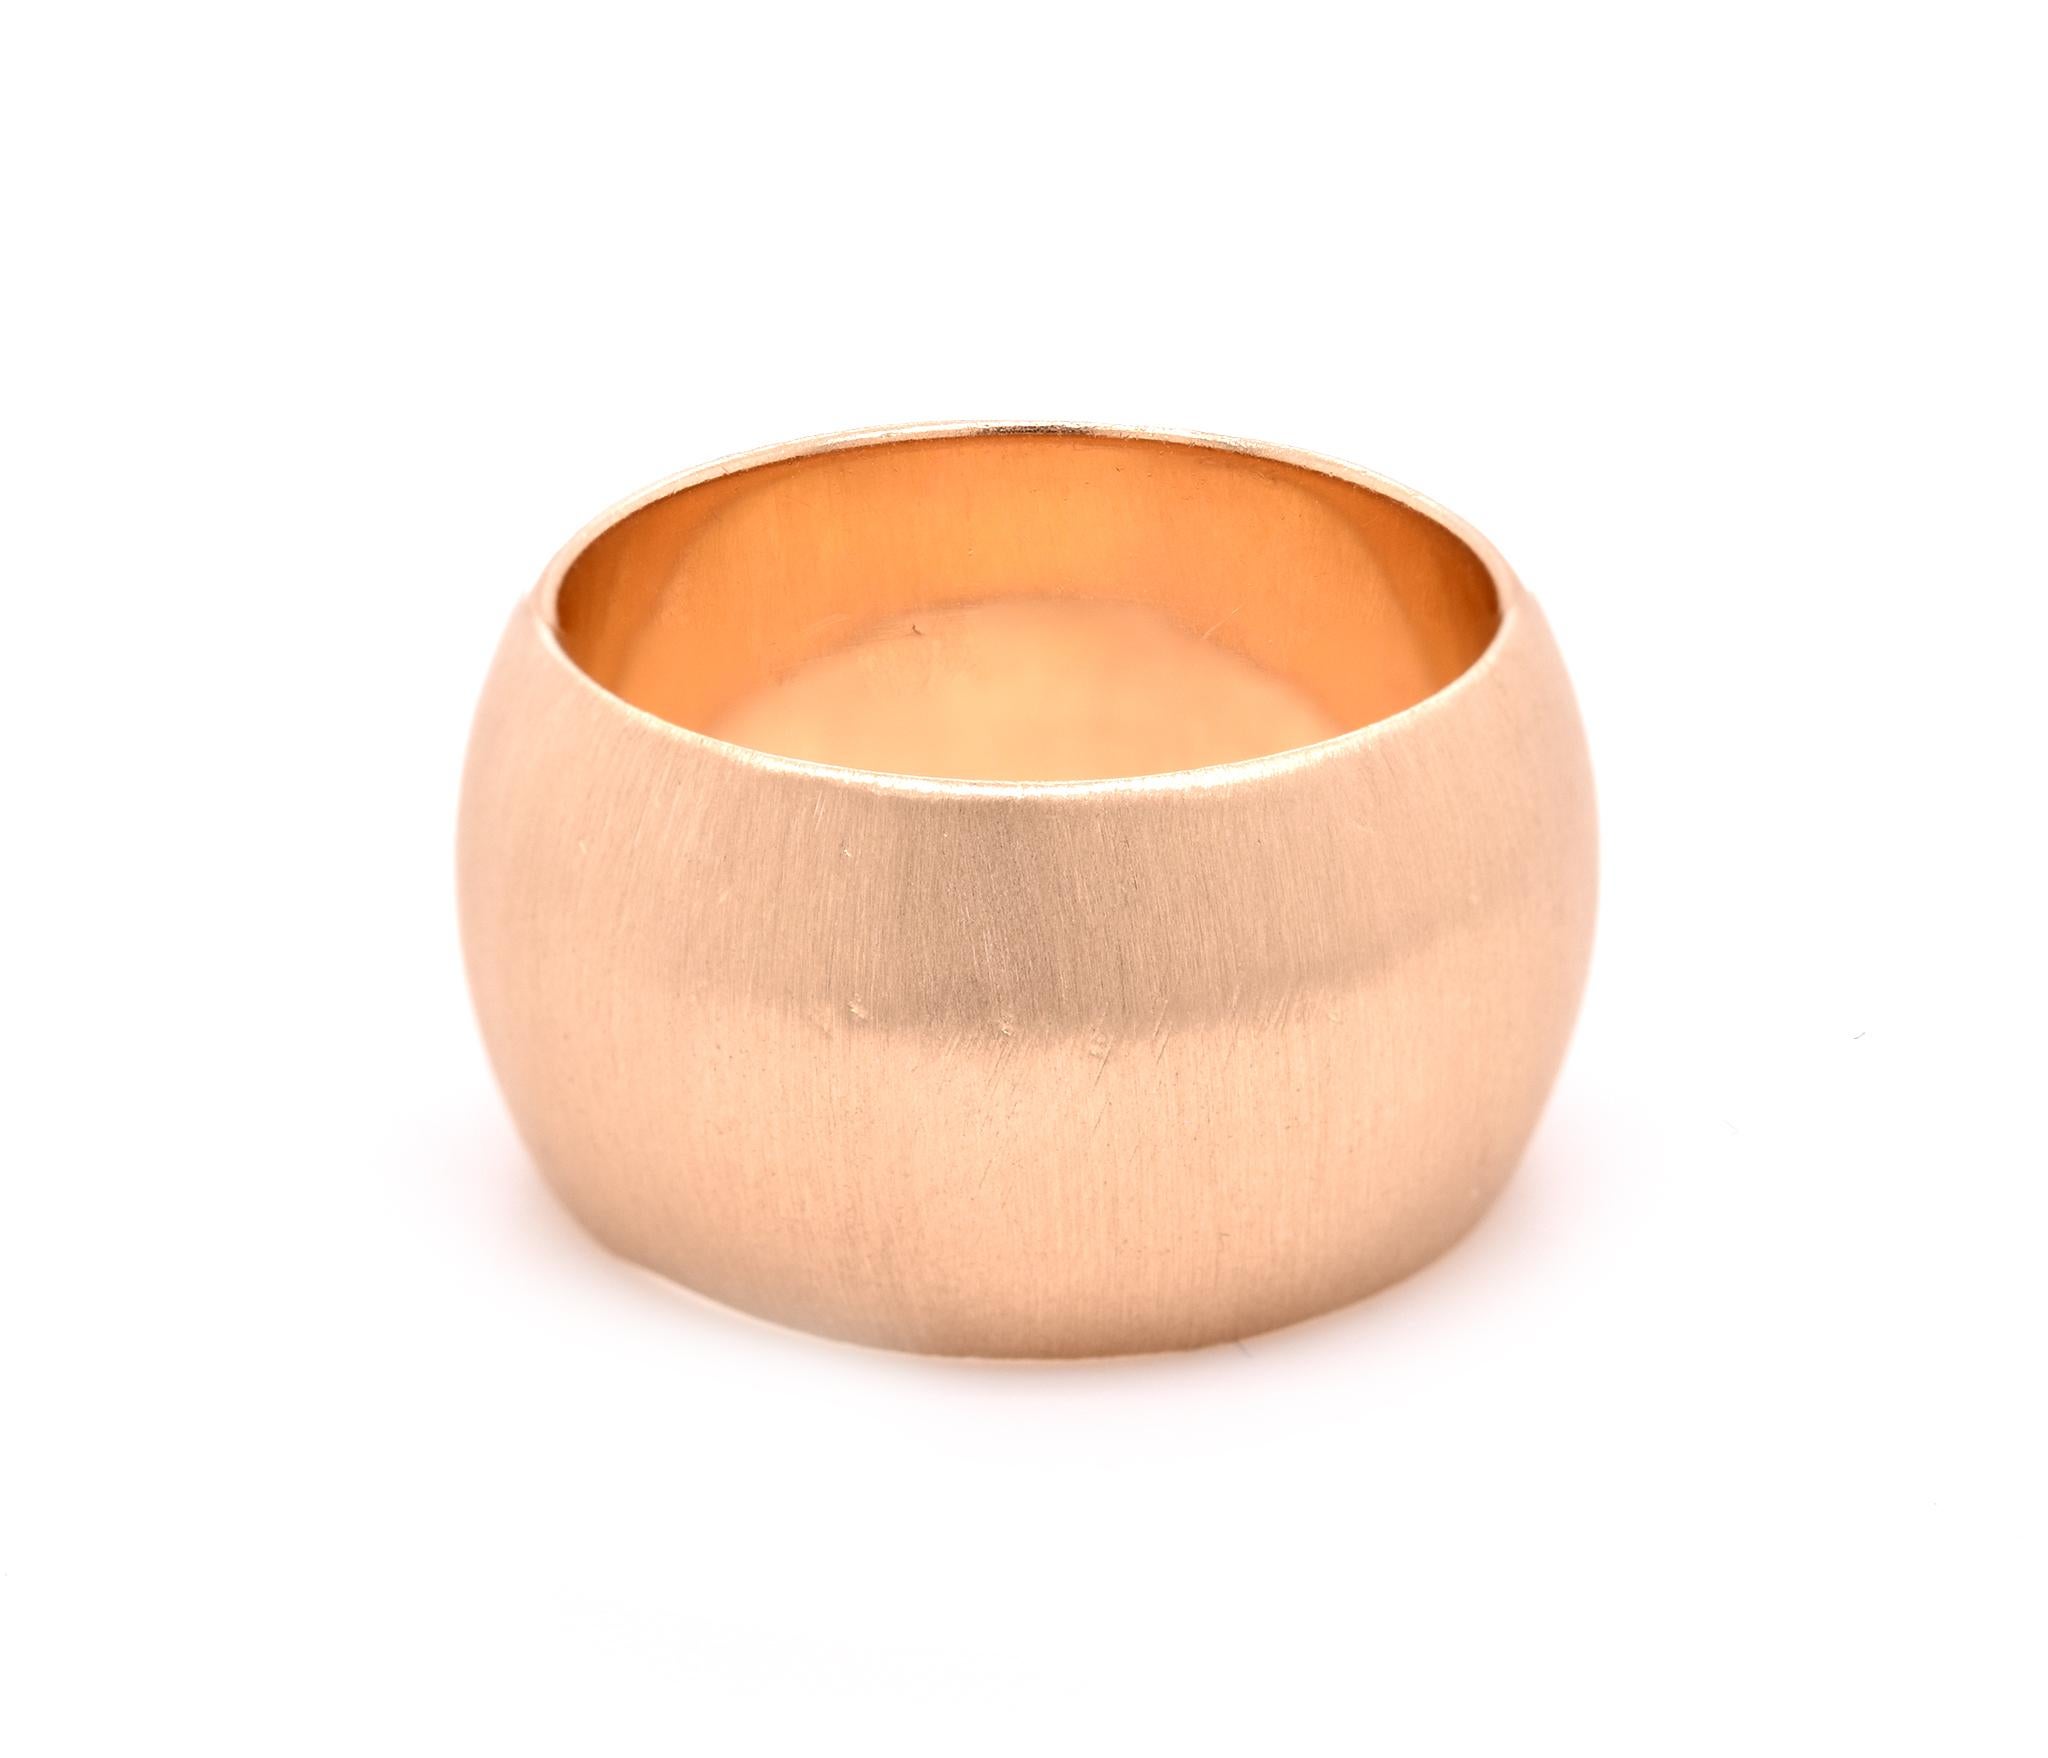 Designer: custom 
Material: 14K yellow gold 
Dimensions: the ring measures 12mm wide 
Size: 7.5
Weight:  13.65 grams